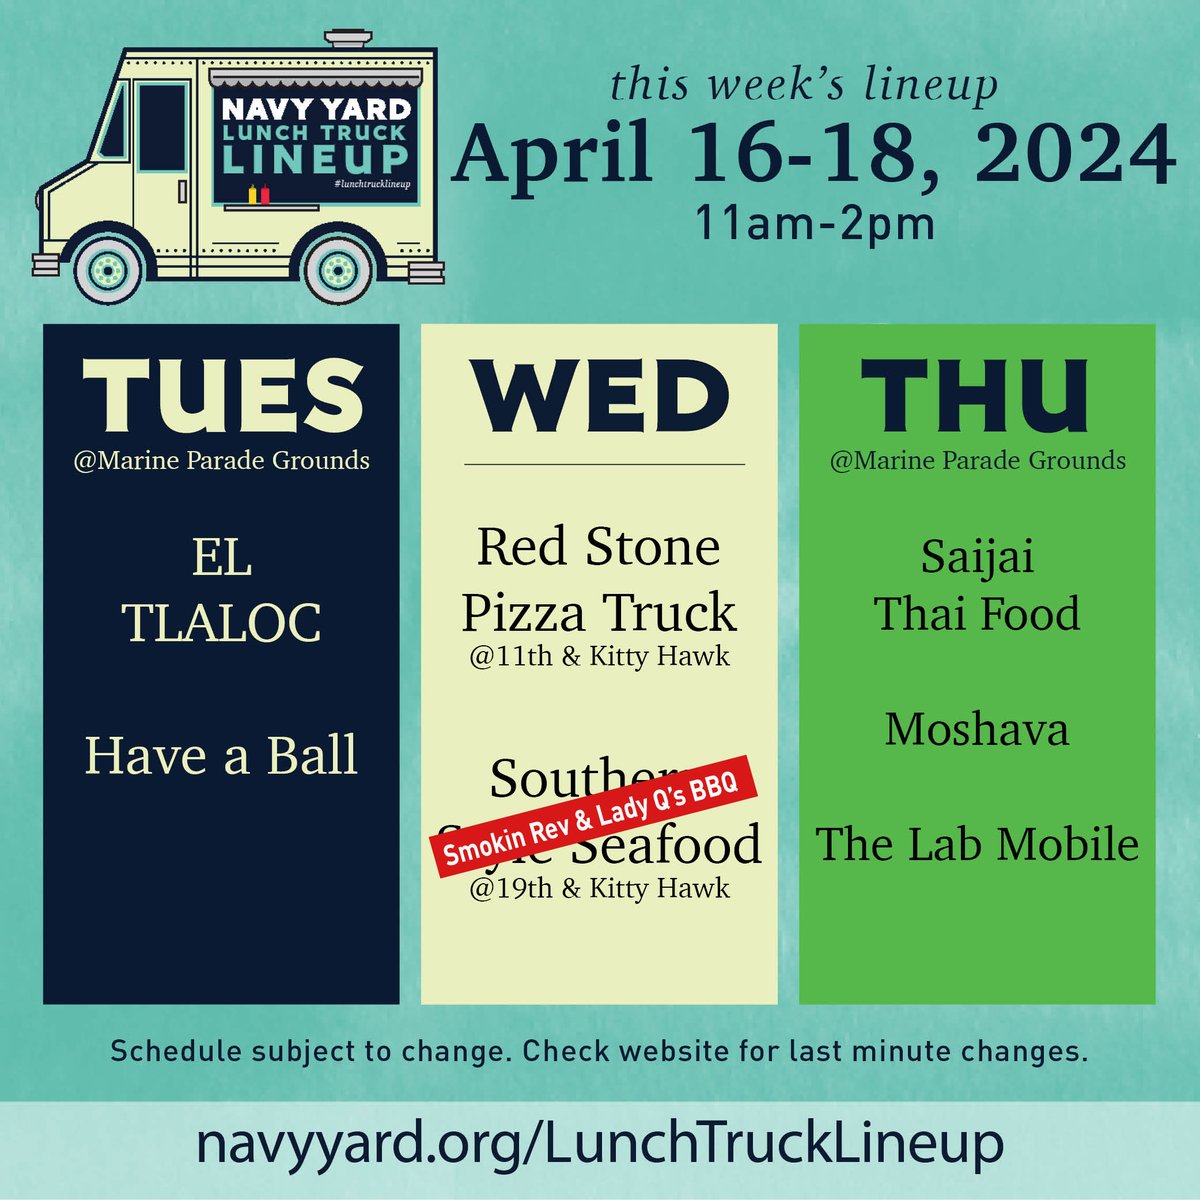 UPDATE FOR TODAY'S SCHEDULE! Smokin' Rev & Lady Q's BBQ will be at 19th & Kitty Hawk, 11-2p! #navyyardeats #lunchtrucklineup #discovertheyard #navyyardphilly